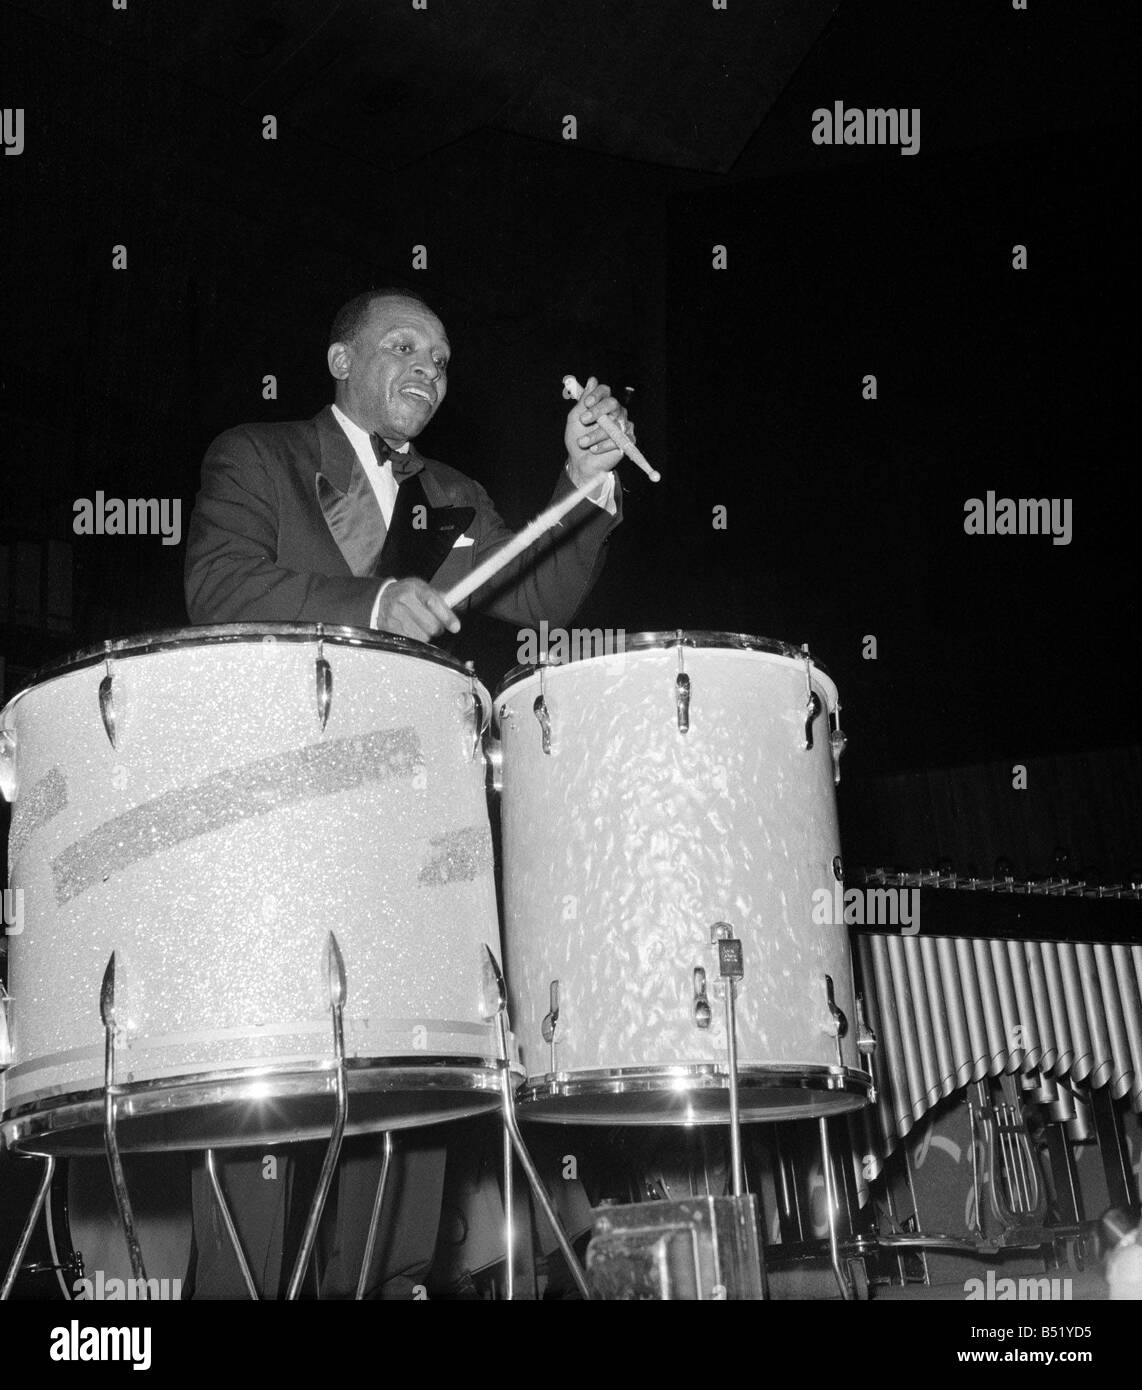 1950s Jazz performers Lionel Hampton band leader at the Royal Festival hall in London Playing on drums Stock Photo